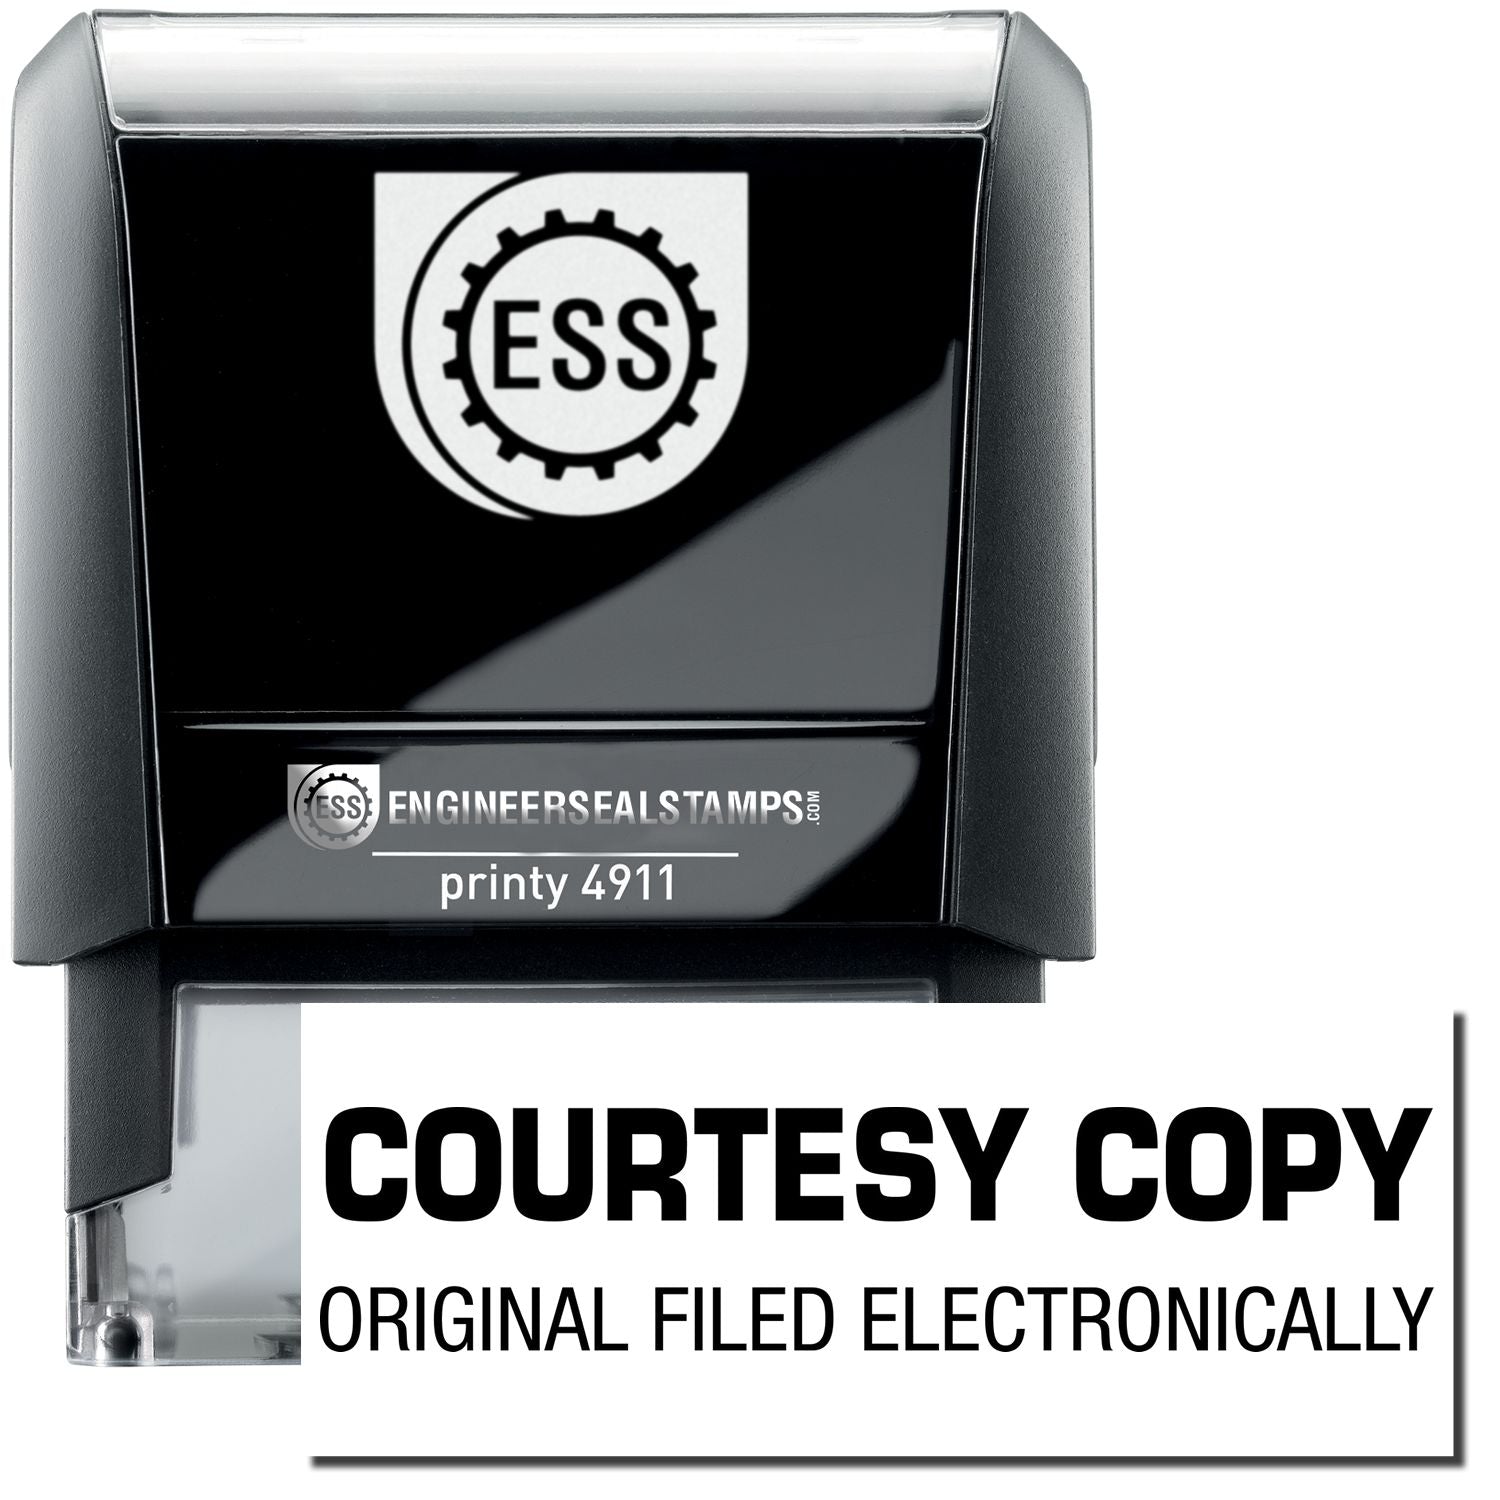 A self-inking stamp with a stamped image showing how the text "COURTESY COPY" in a bold font and under it, the text "ORIGINAL FILED ELECTRONICALLY" in a small narrow font is displayed after stamping.